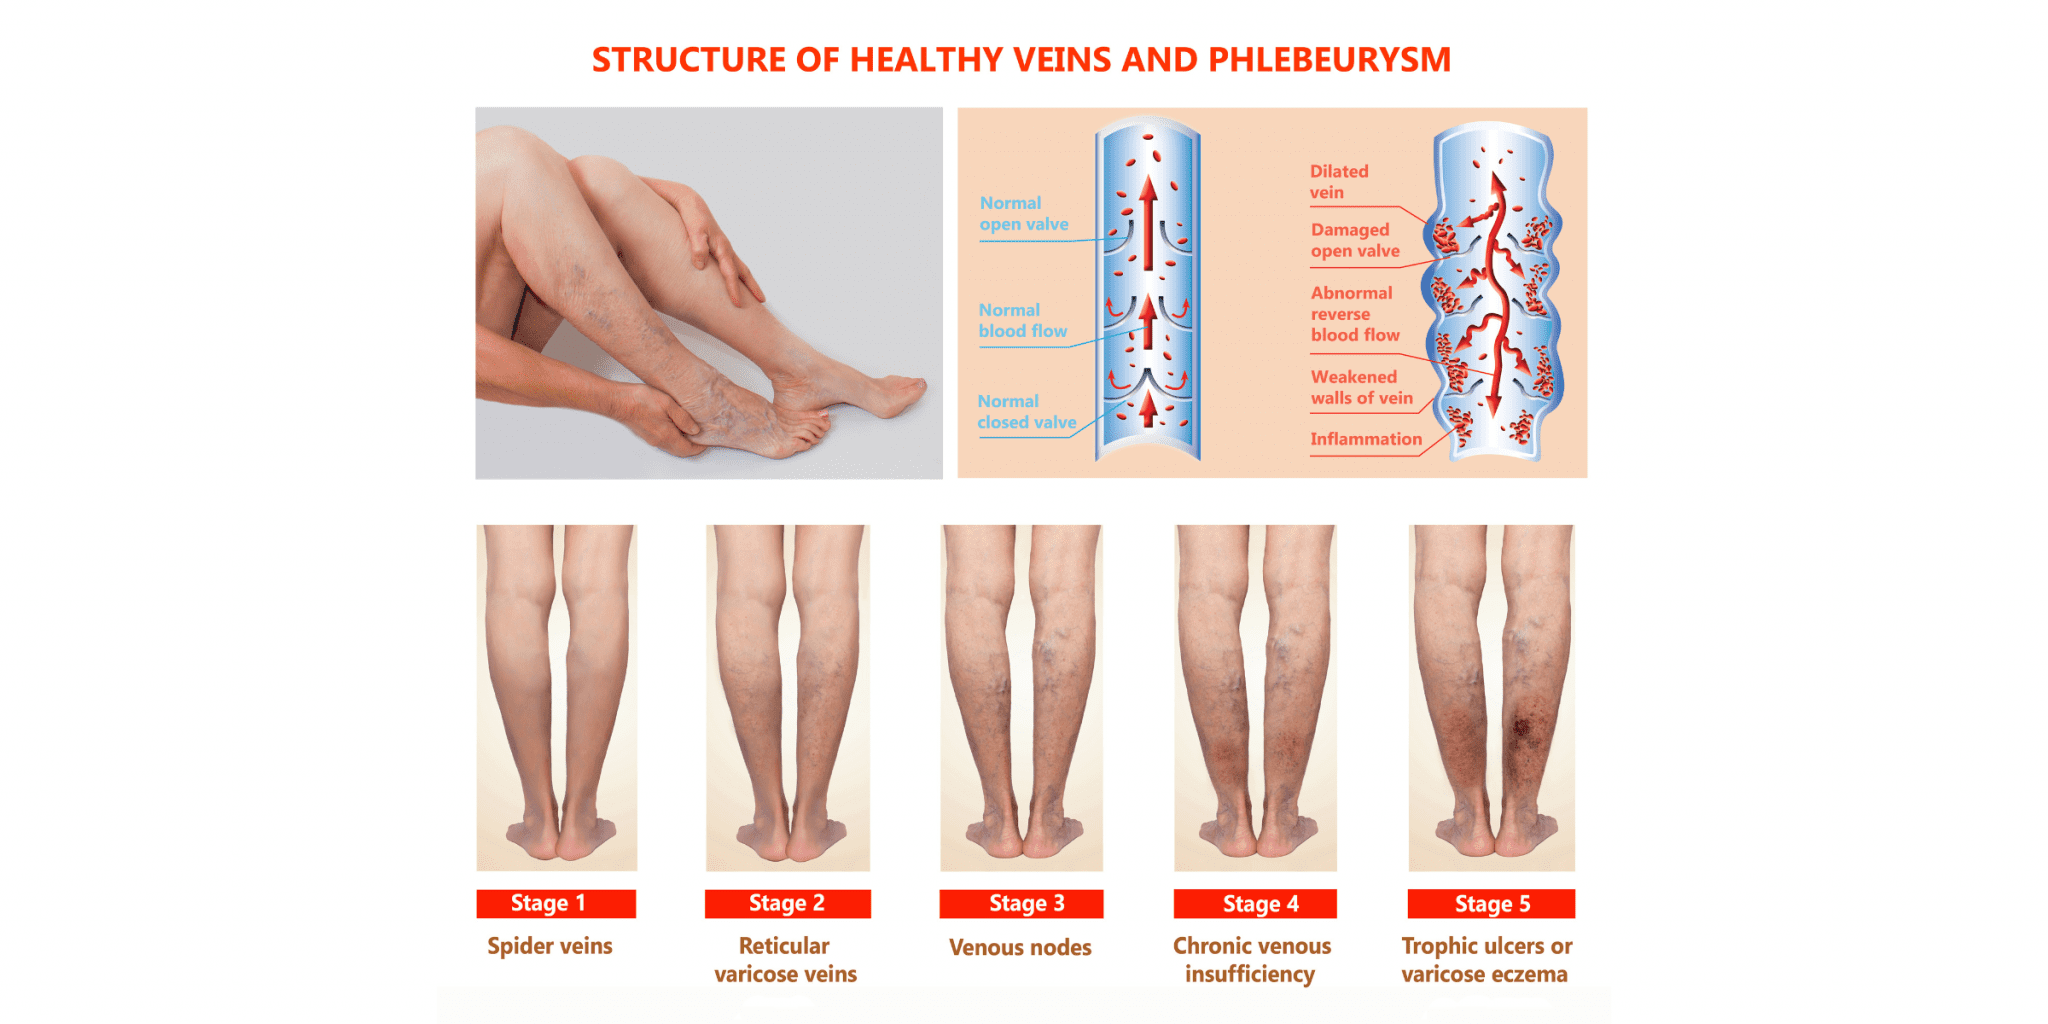 chronic venous insufficiency is stage 4 unhealthy veins